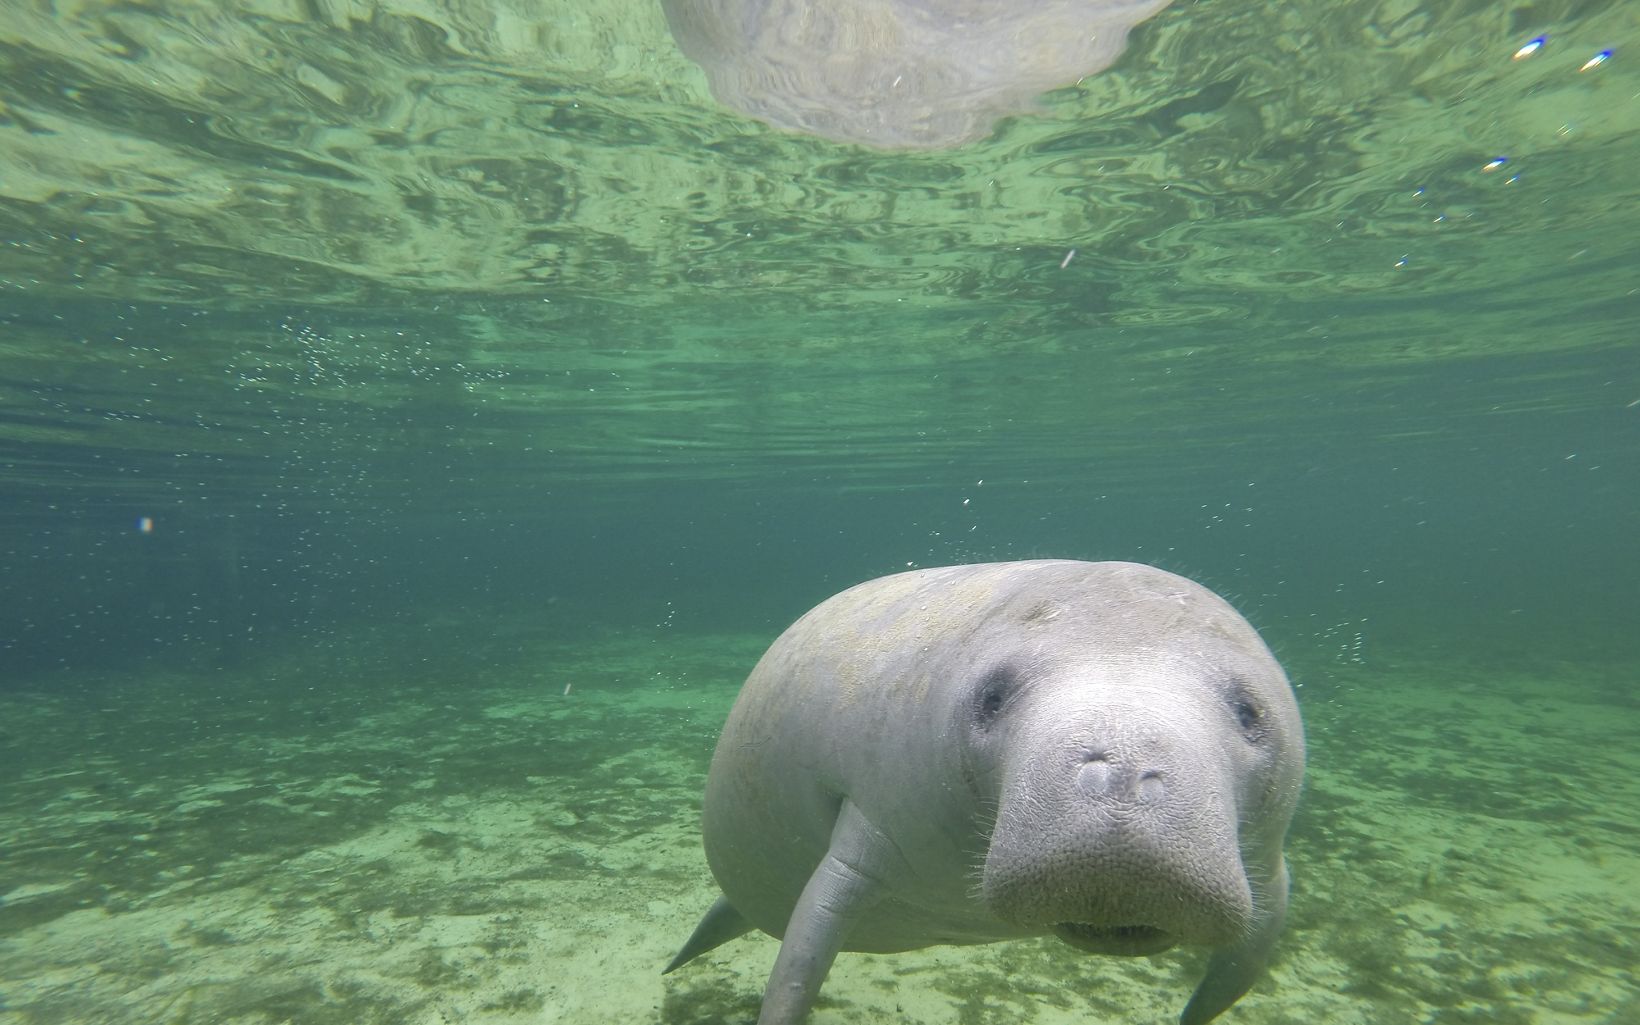 Curious Manatee In 2017 the U.S. Fish & Wildlife Service downlisted manatees from endangered to threatened. But they're not out of danger yet. © Amy Vu